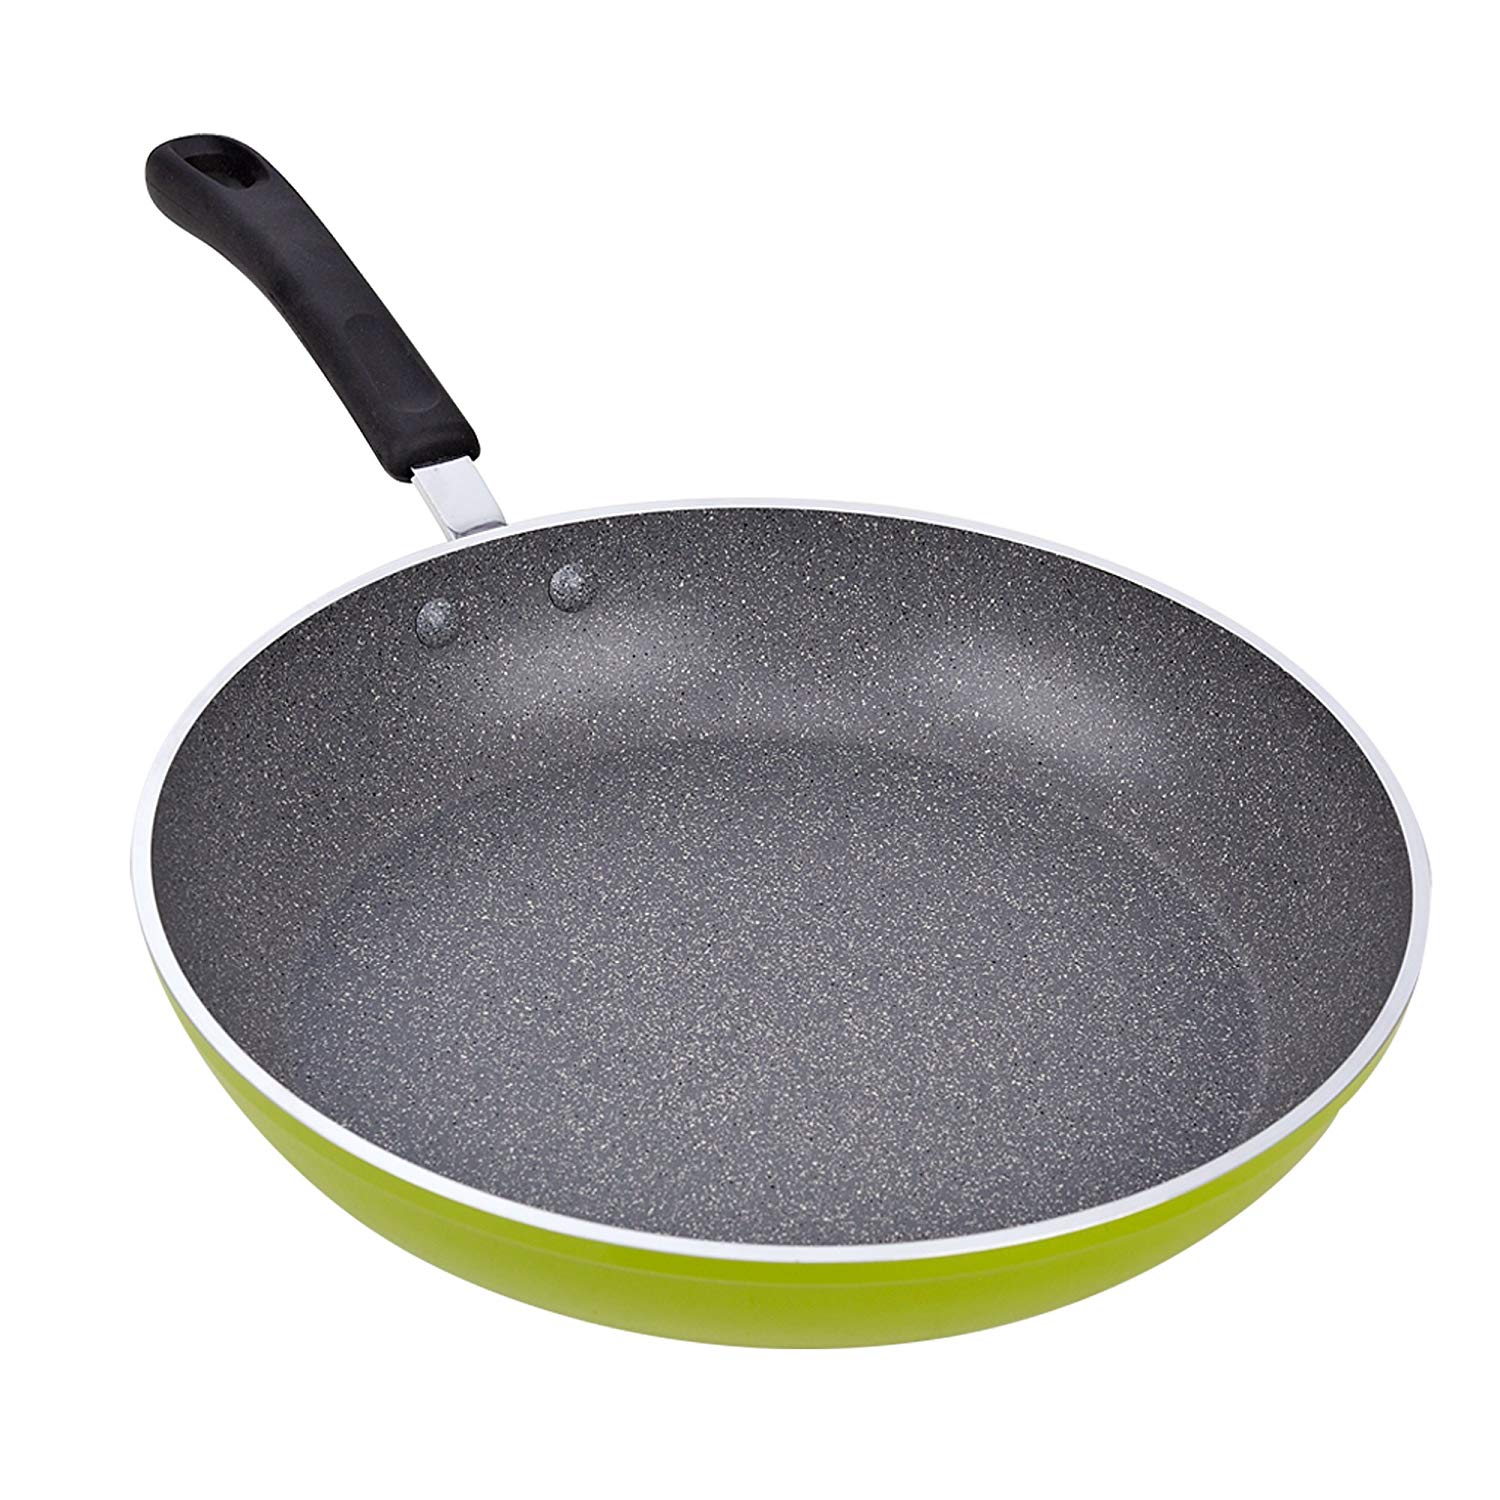 Cook N Home Non-Stick Frying Pan, 12-Inch